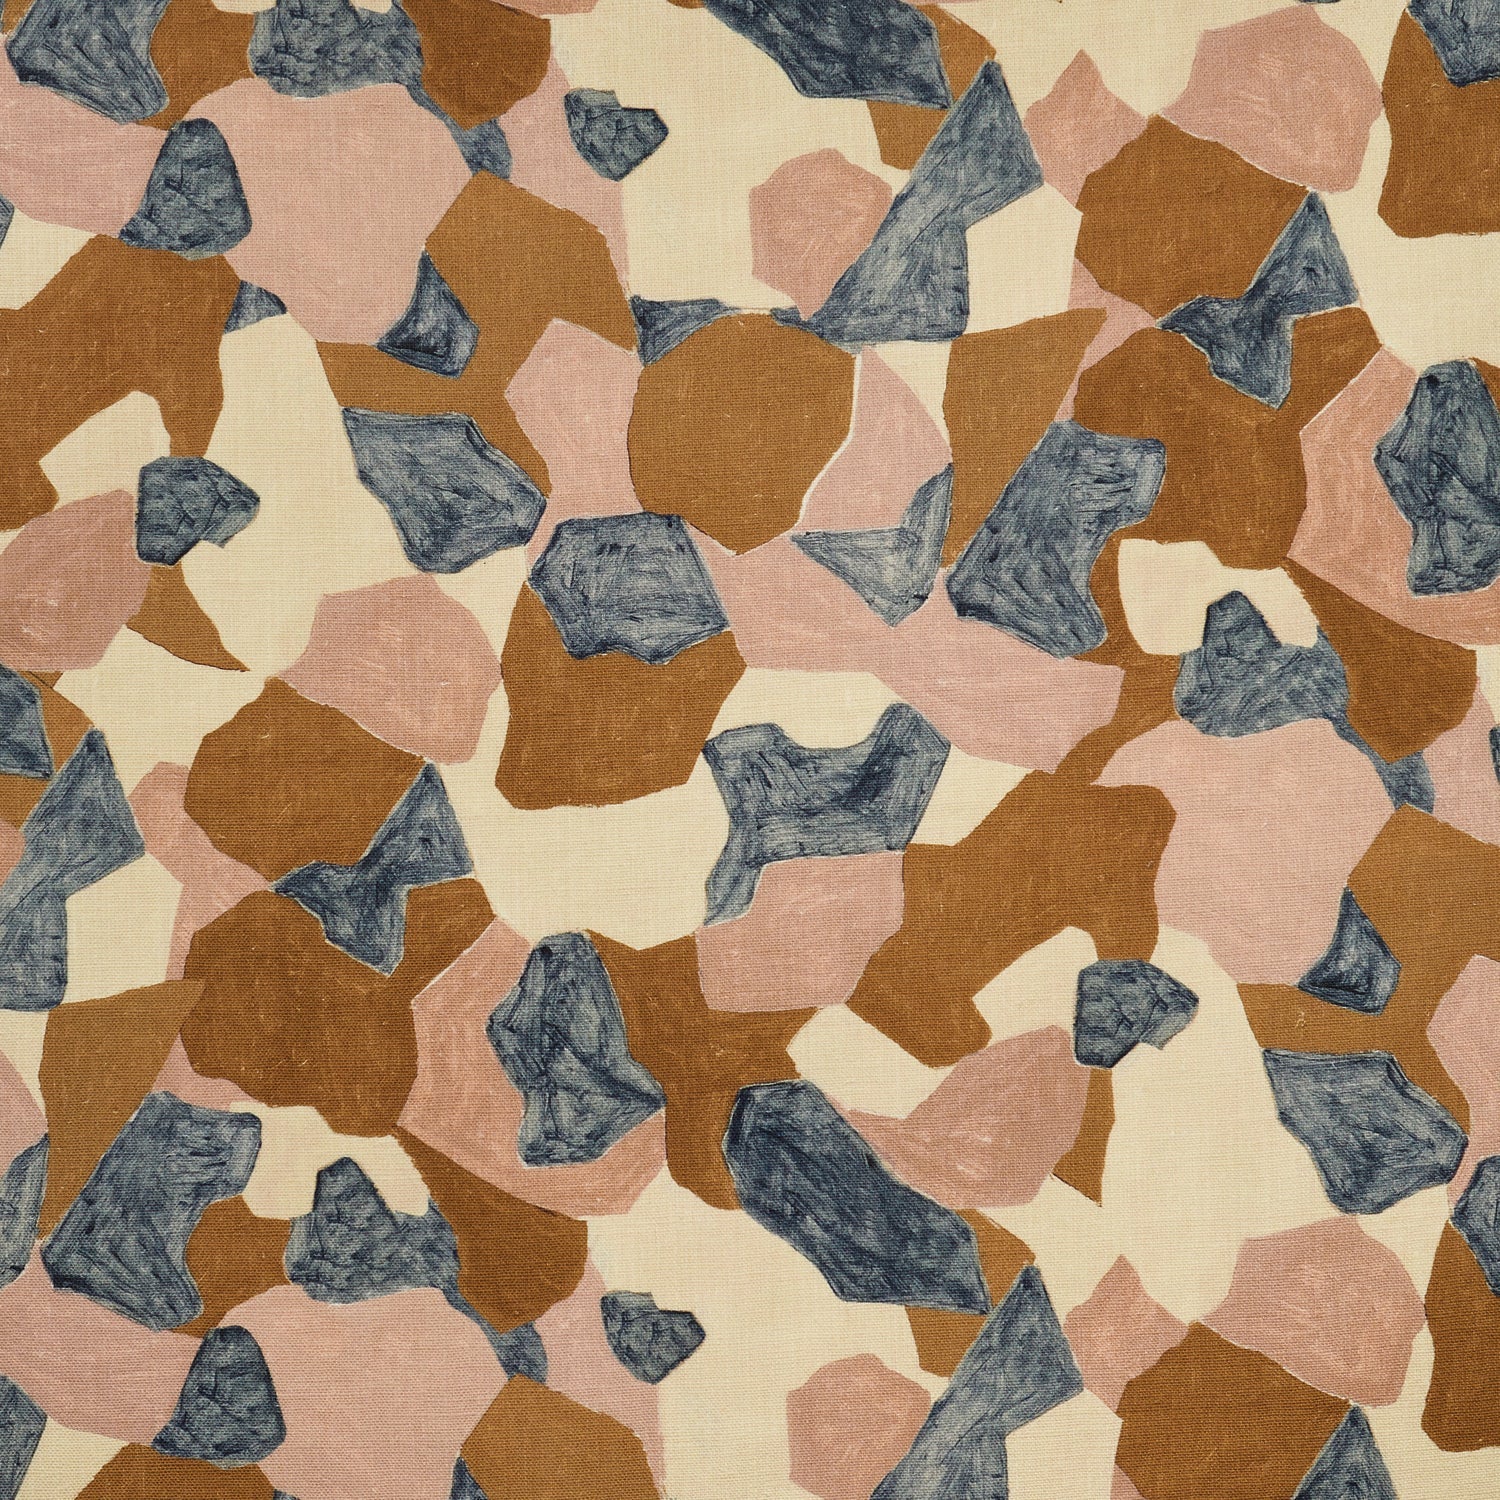 Woven fabric swatch in a painterly geometric pattern in shades of mauve, brown, cream and navy.